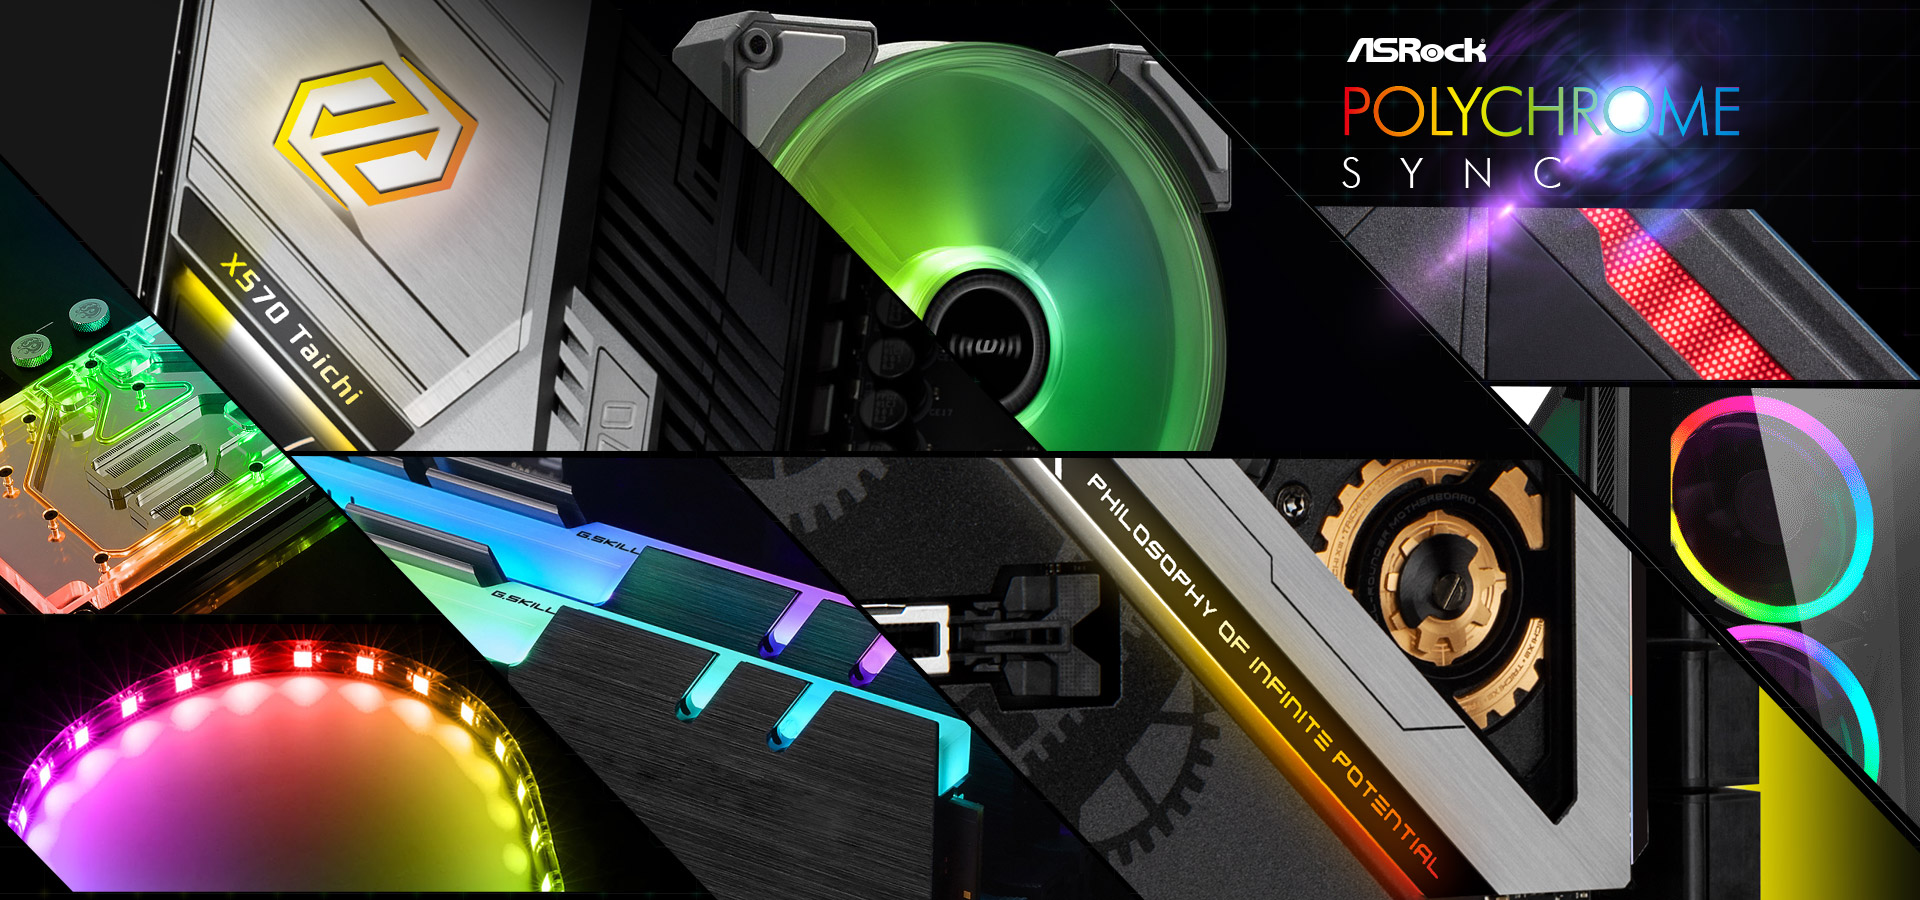 Different Closeup Shots of RGB-Lit Components and the RGB-Lit Areas on the ASRock X570 Taichi Motherboard